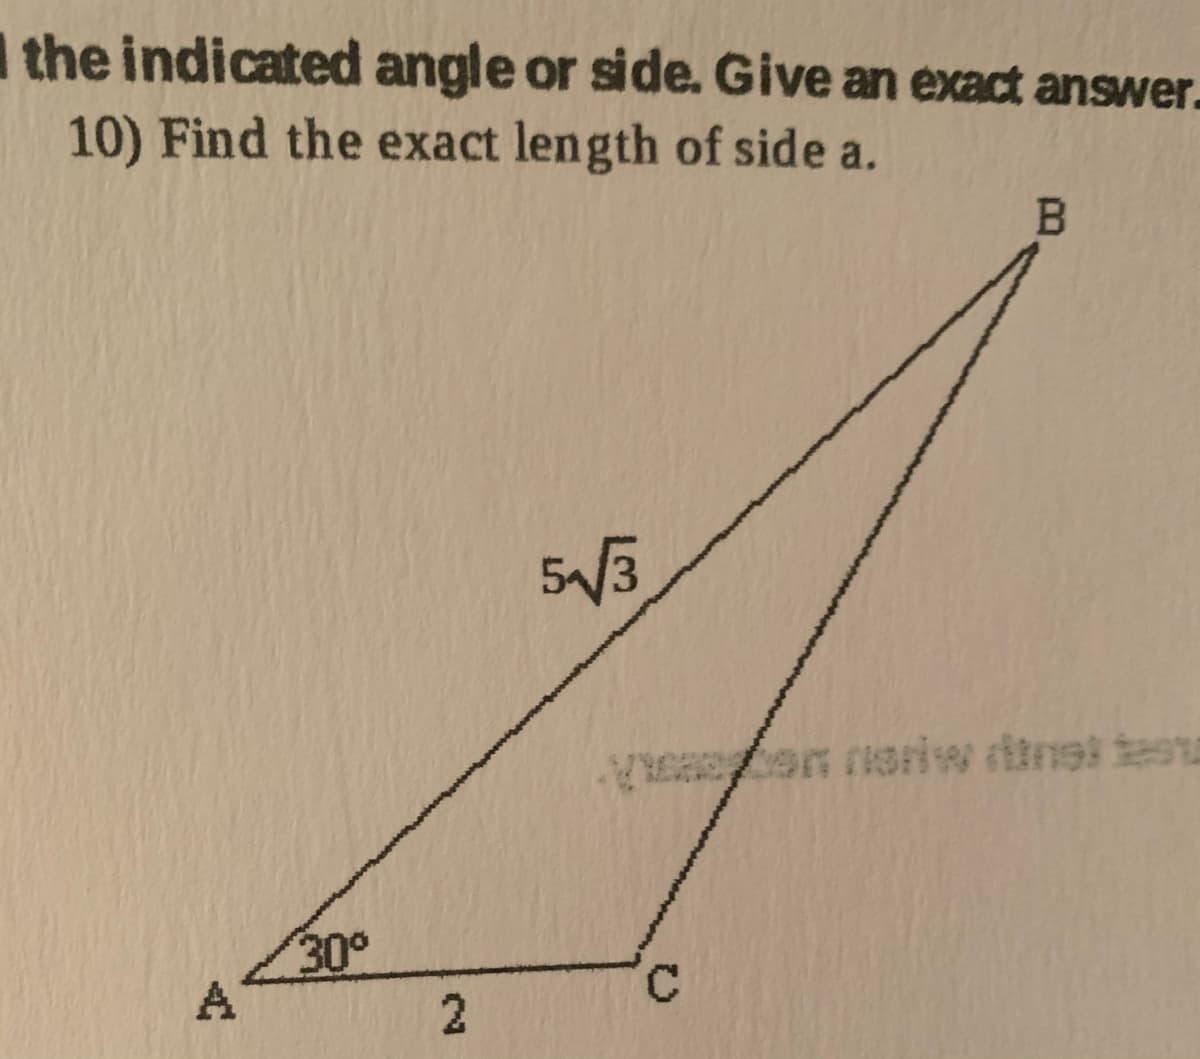 the indicated angle or side. Give an exact answer.
10) Find the exact length of side a.
tan noriw din9t testa
30°
A
2.
